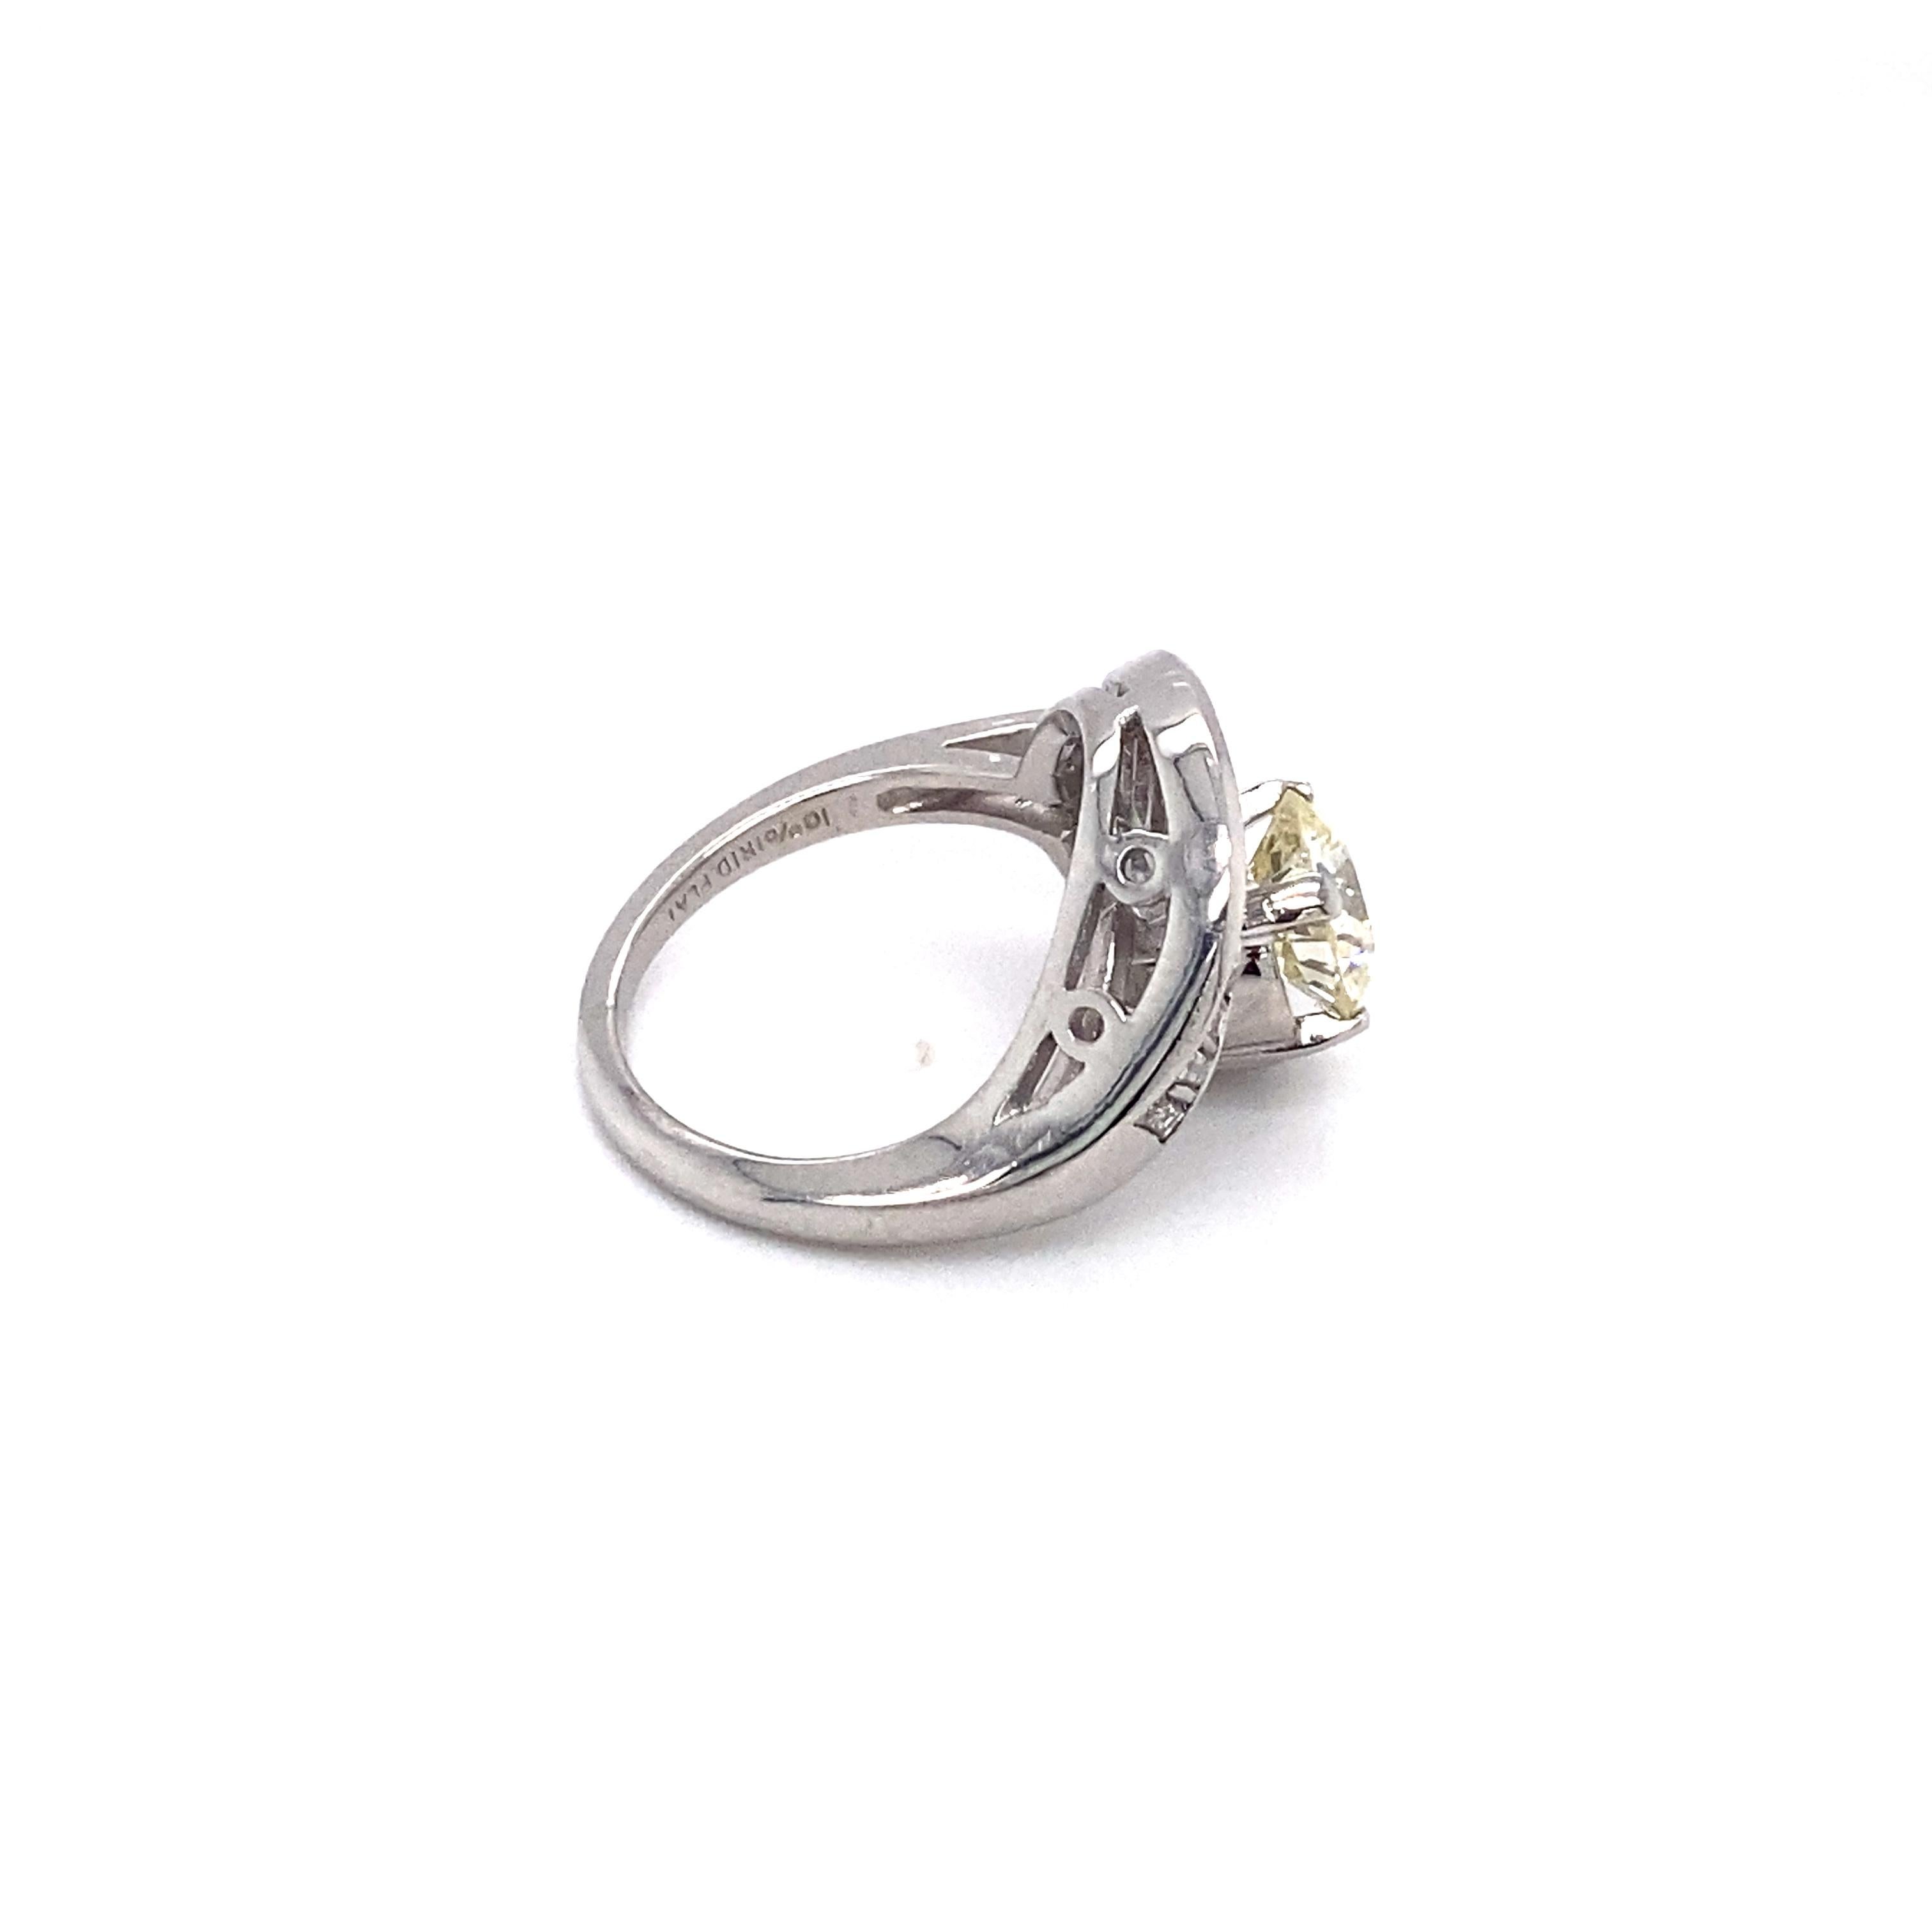 This beautiful swirl ring features a center diamond at 1.37 carats. The ring dates from the 1950s, but the center diamond likely dates from the early 1900s. 

Circa: 1950s
Metal Type: Platinum
Weight: 9 grams
Size: US 4.25, resizable

Diamond